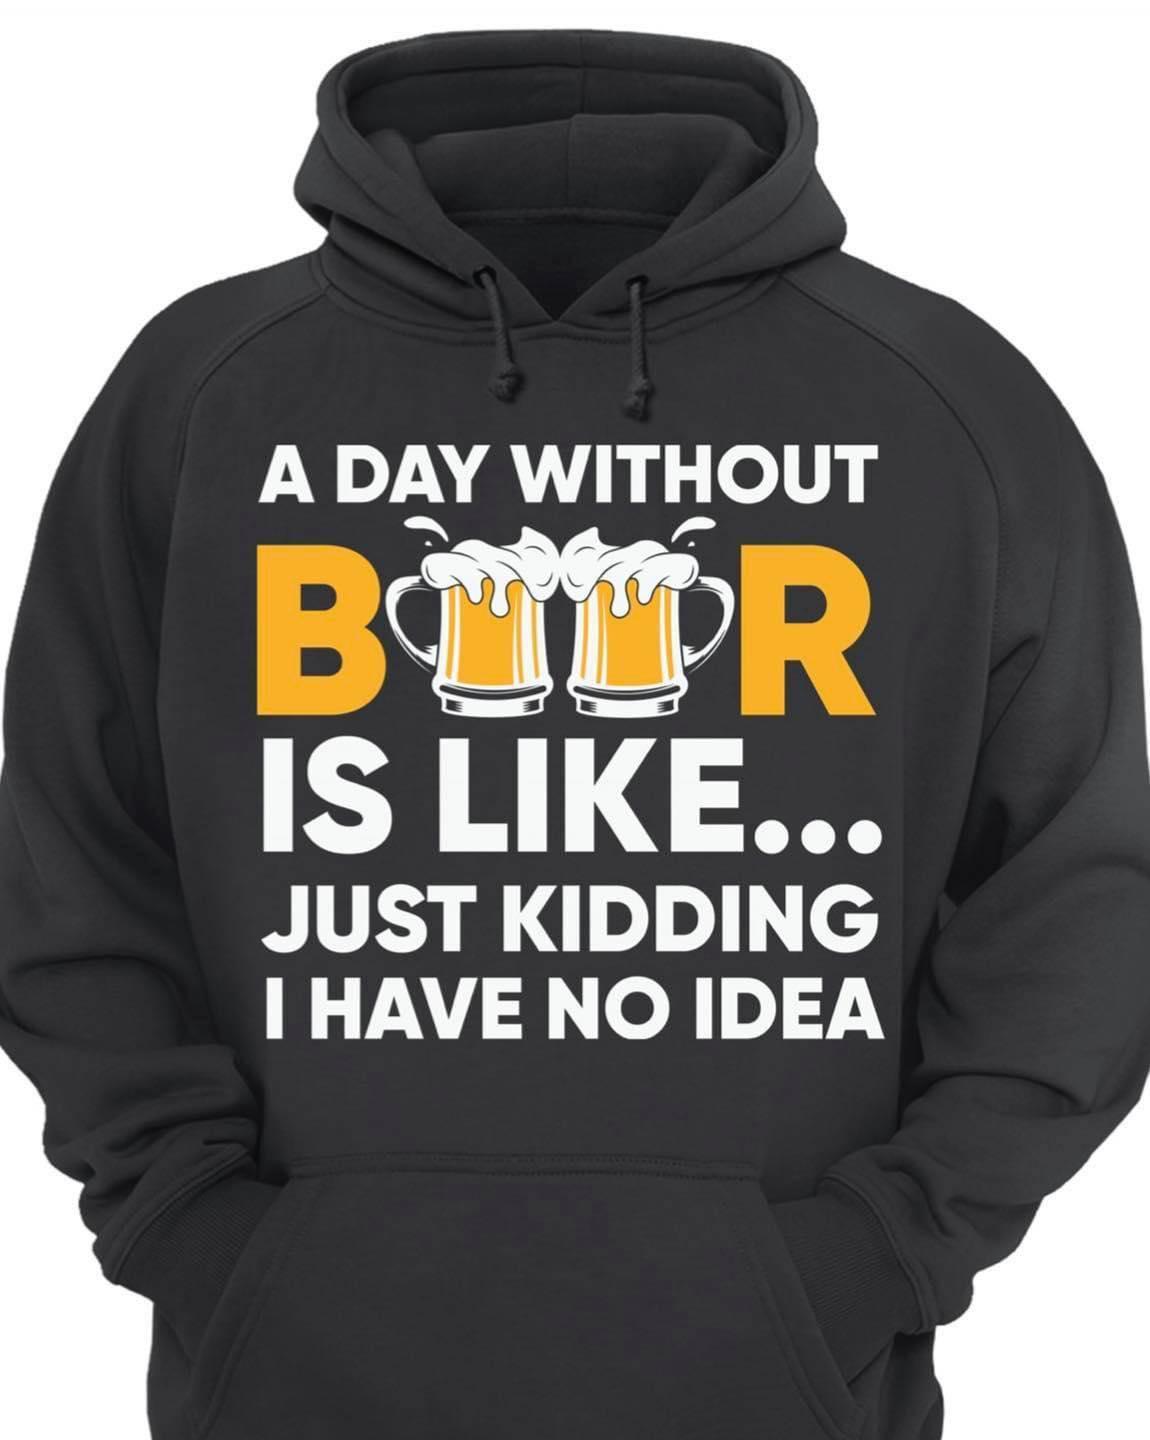 A day without beer just kidding I have no idea - Beer lover gift, cup of beer